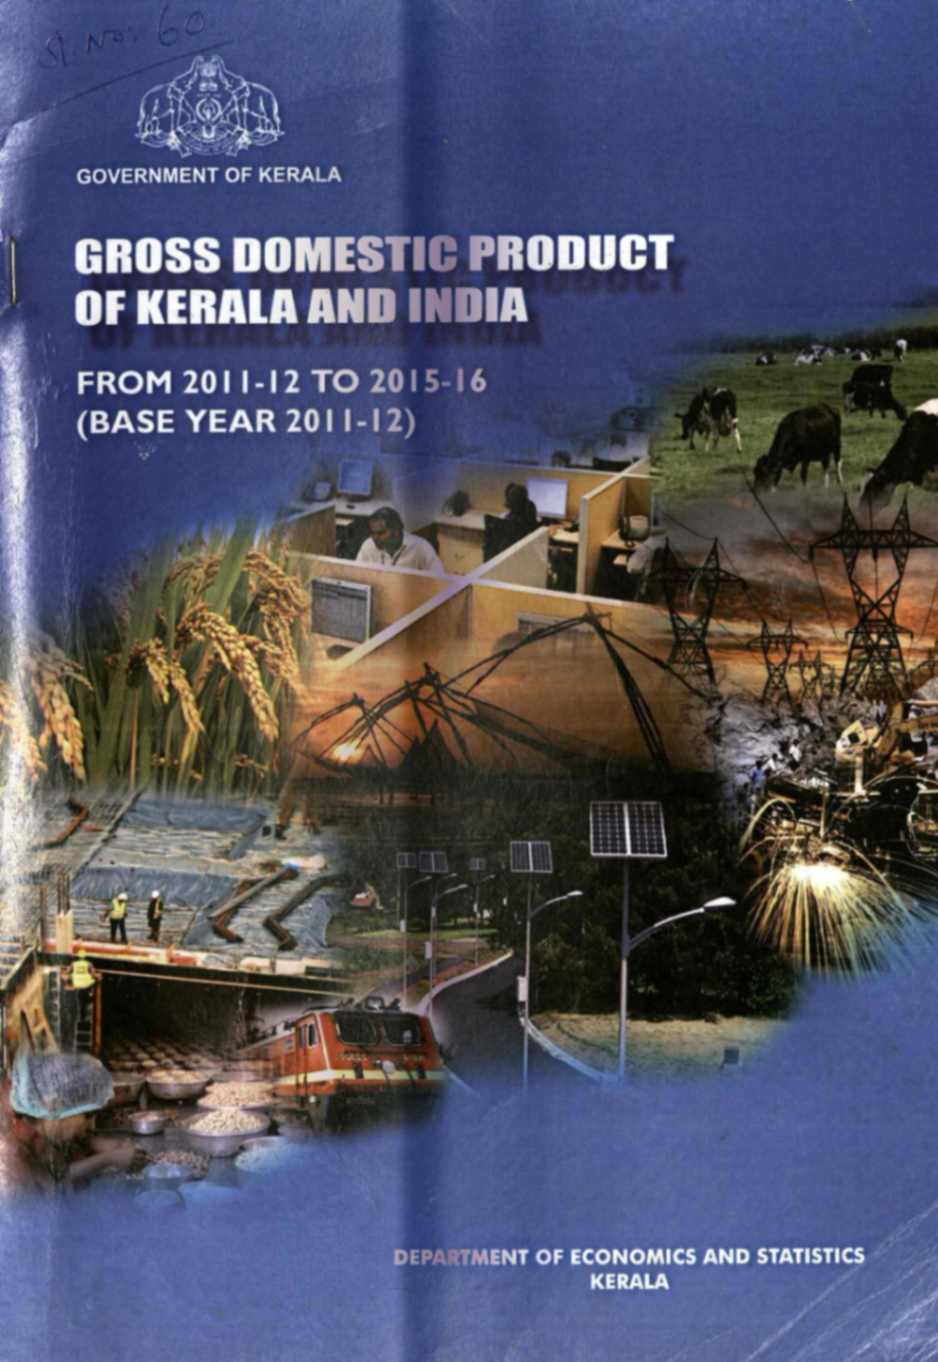 Gross Domestic Product Of Kerala And India From 2011-12 To 2015-16 (Base Year 2011-12)